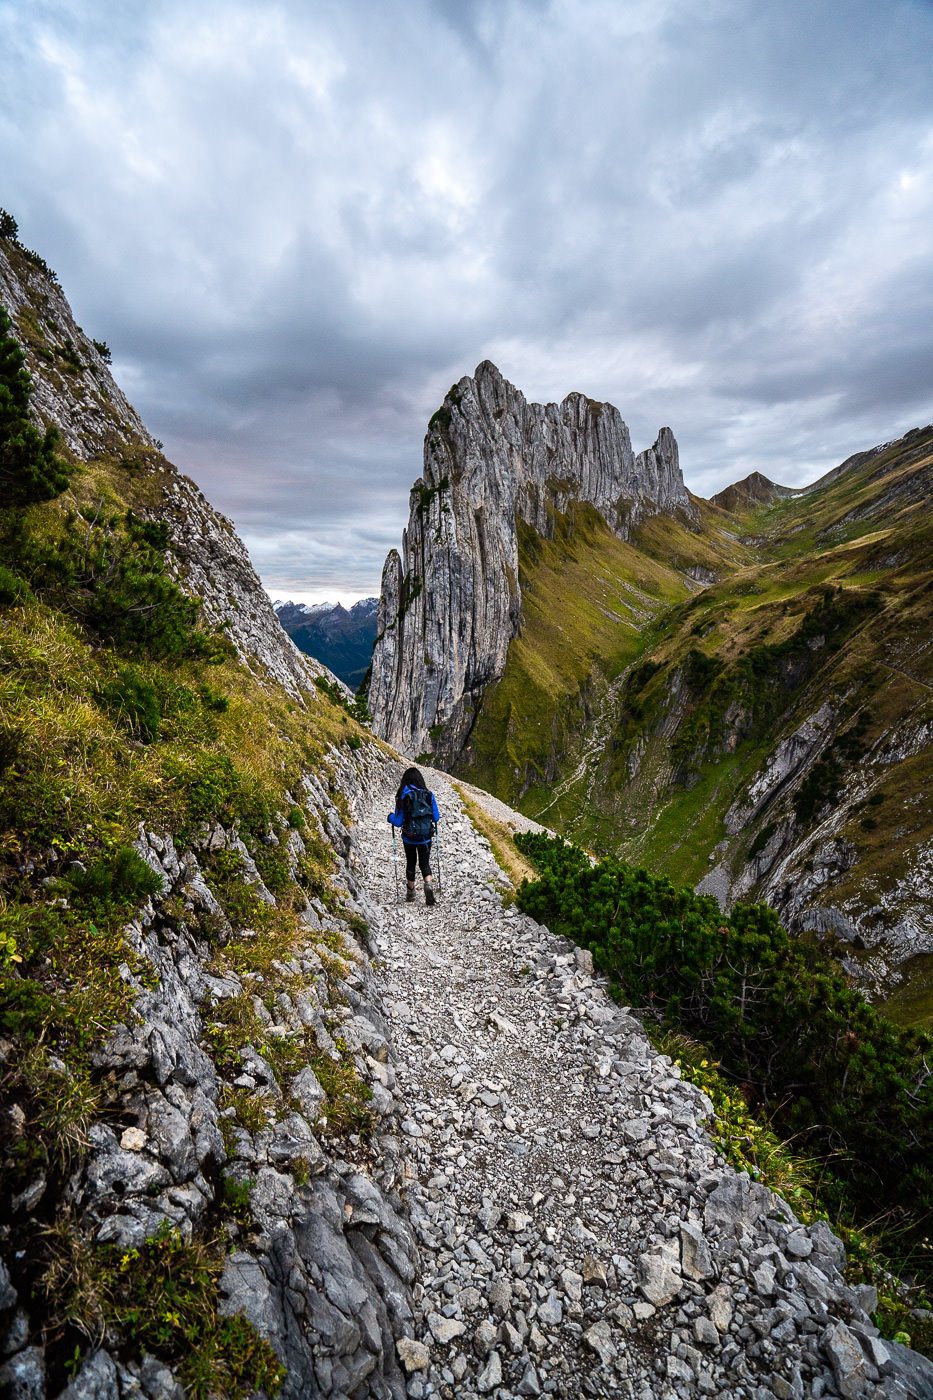 a person walking up a rocky path in the mountains.